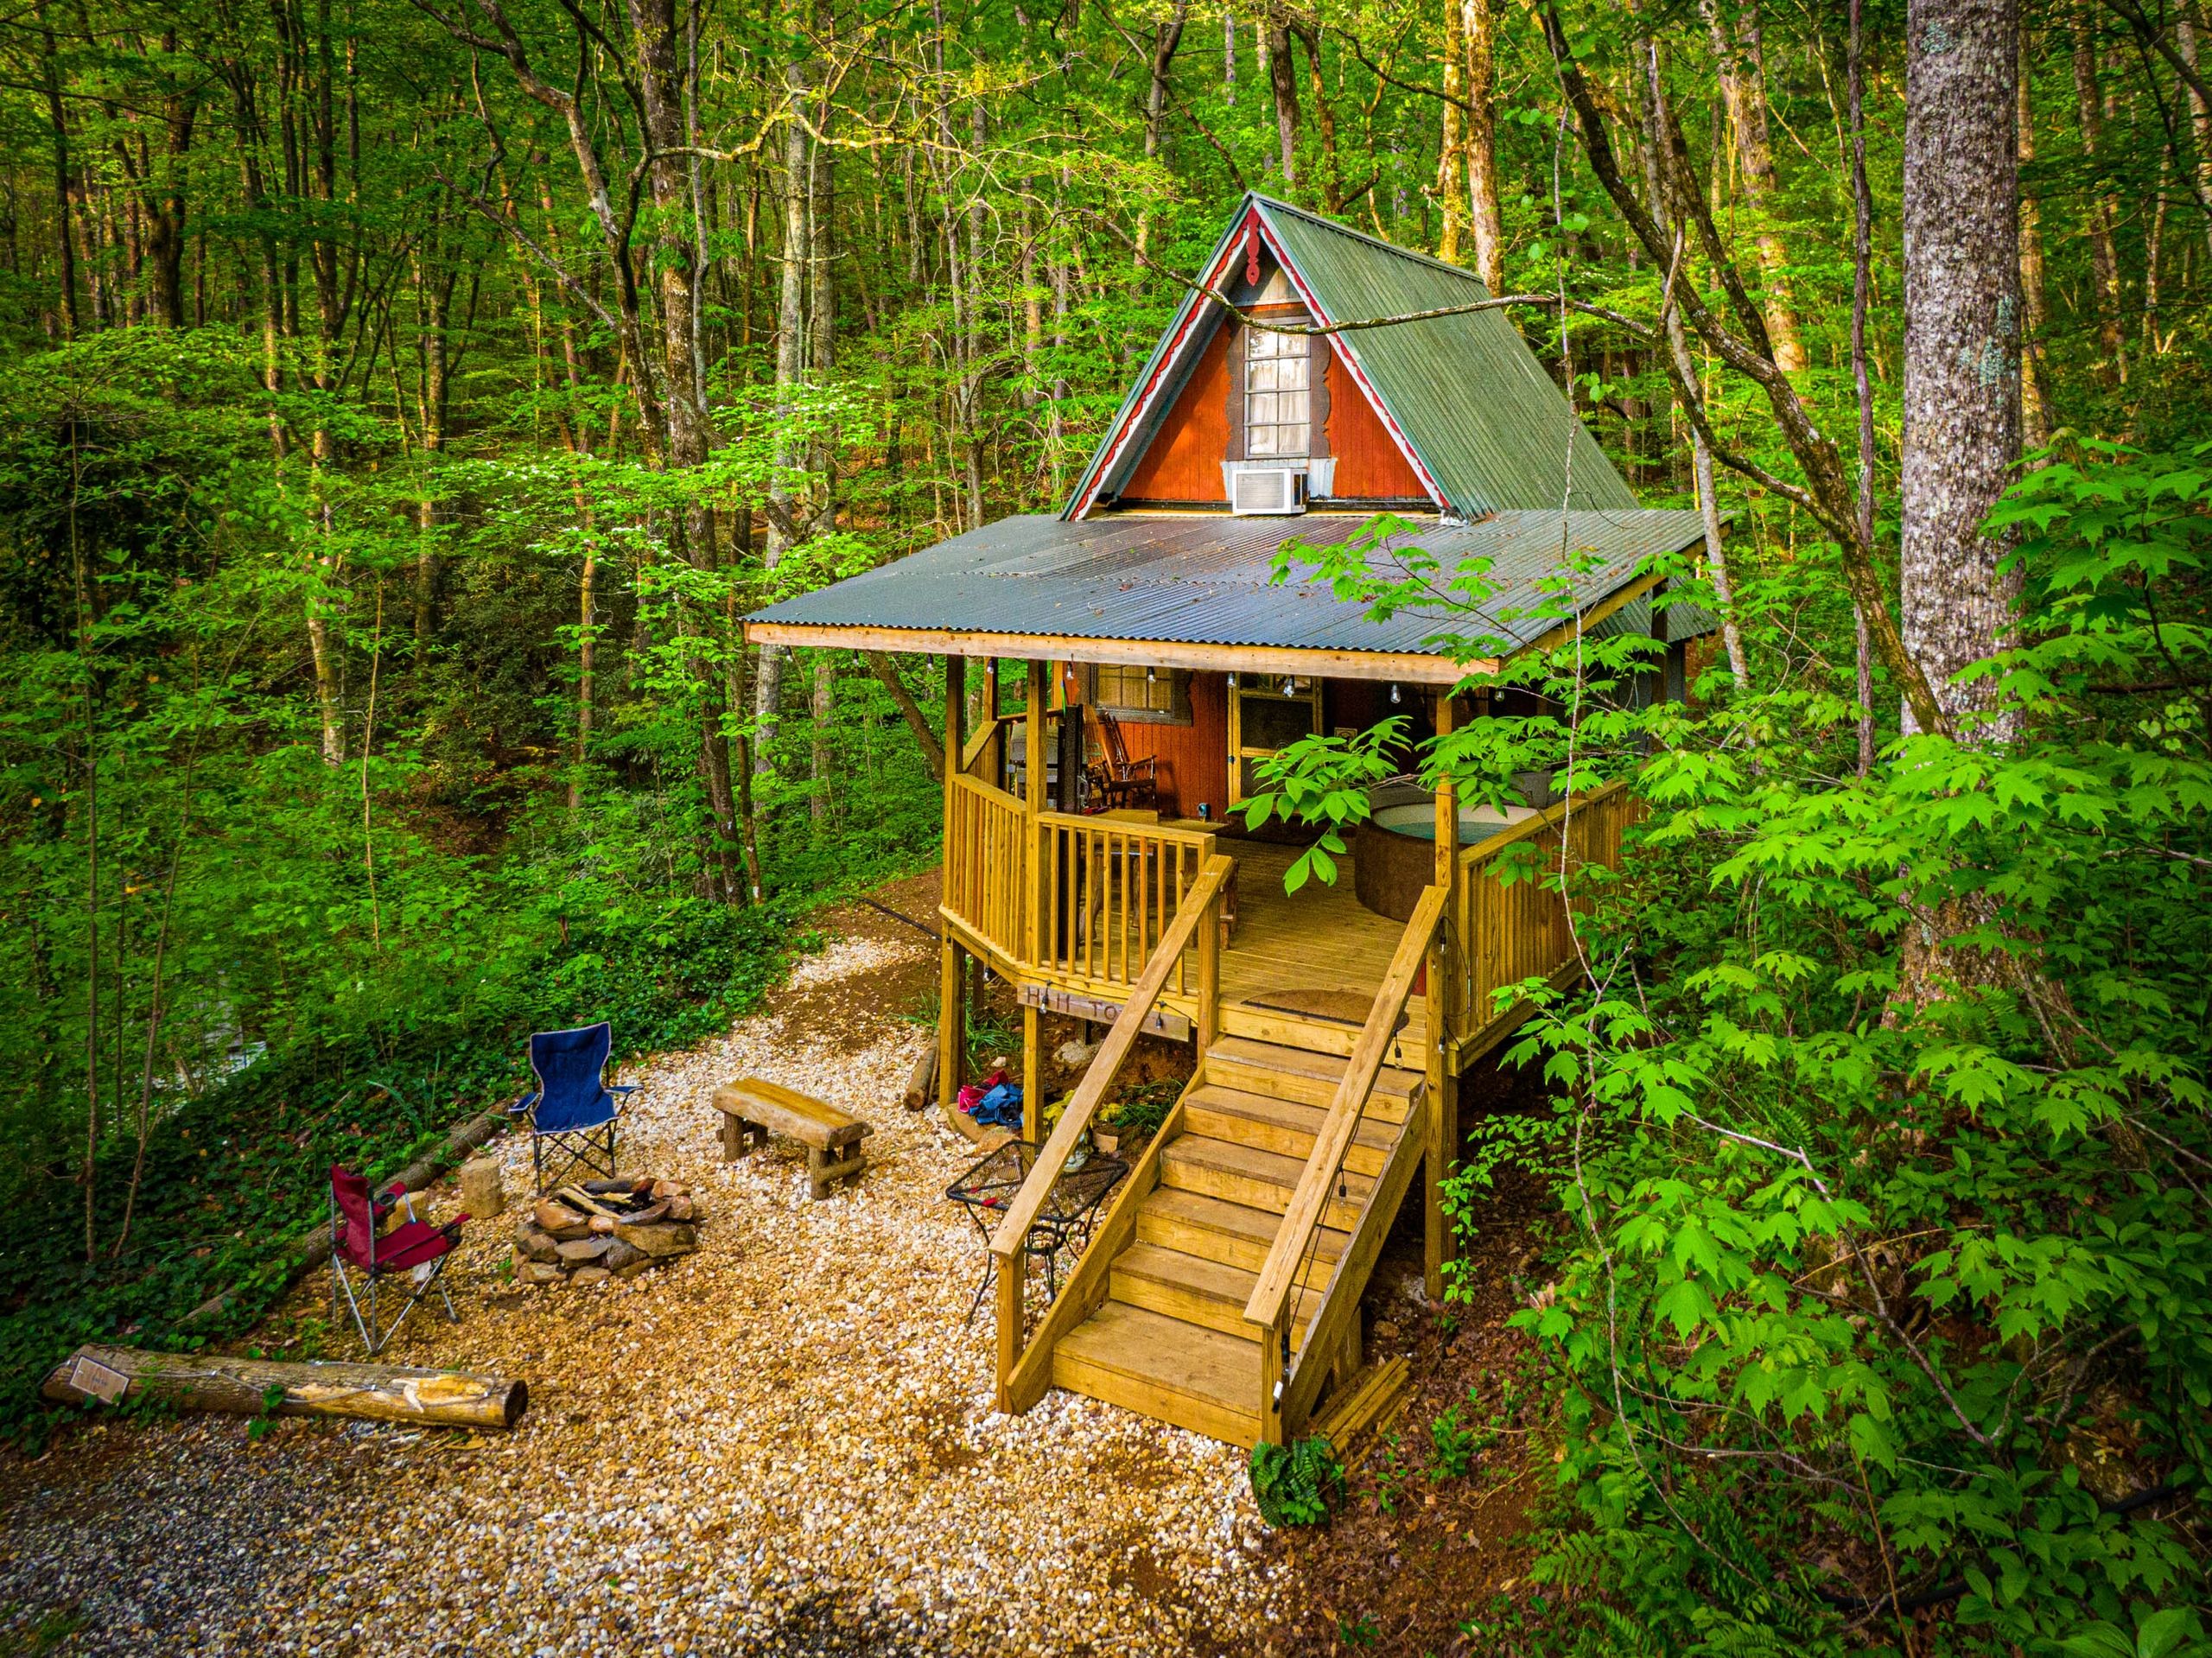 HILLTOP LOFT at Bear Creek Lodge and Cabins in Helen Ga
Hot Tub
Mountainside Fire Pit
1 Q & 3 T
Slee